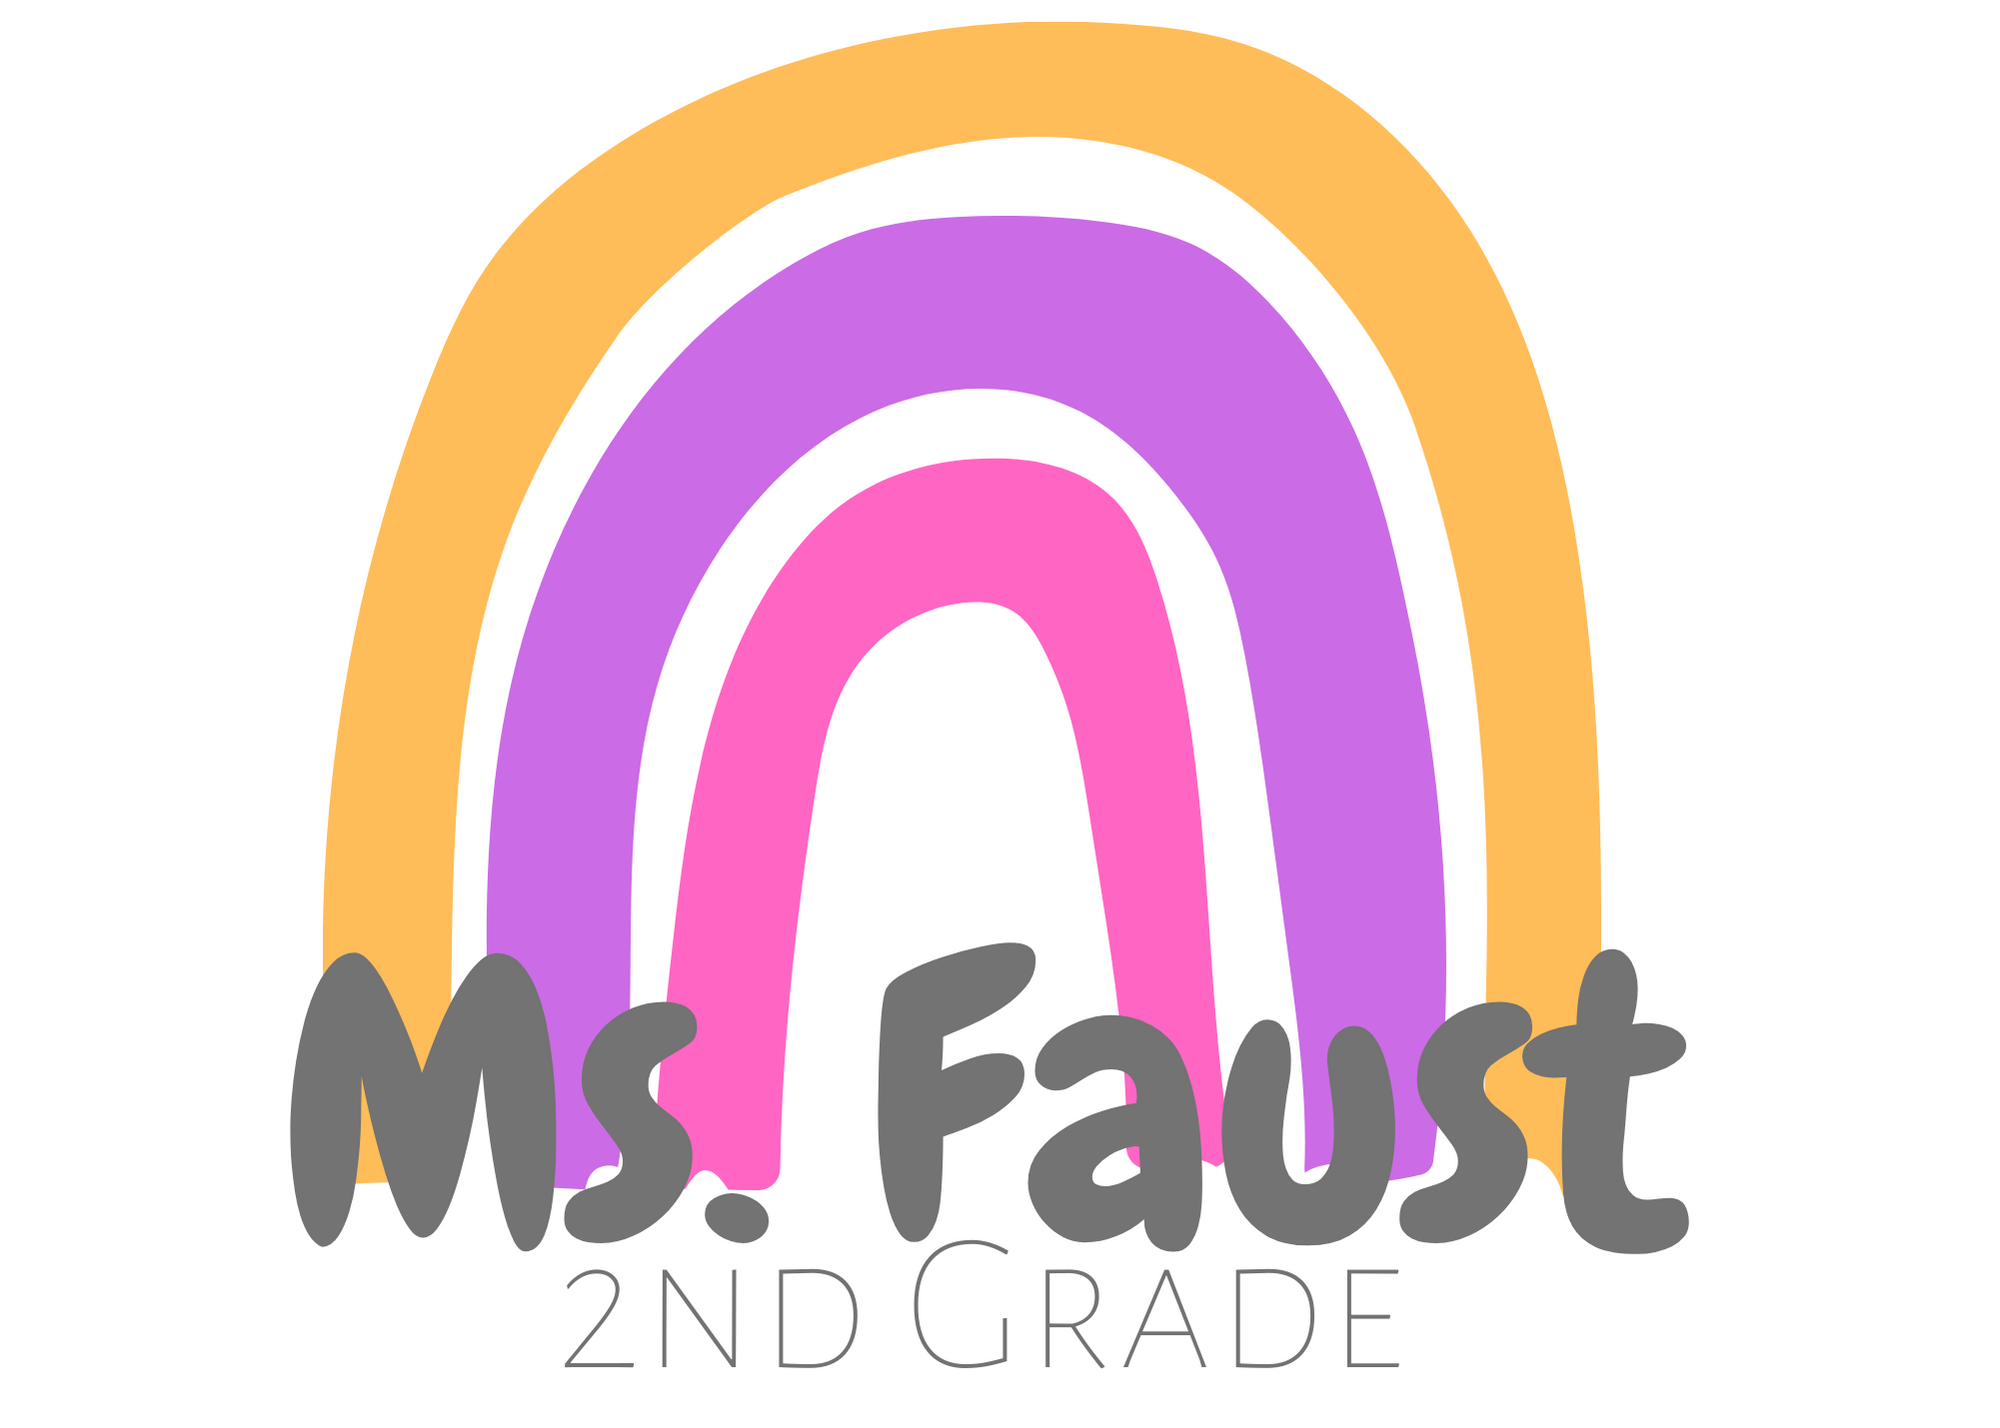 Ms. Faust